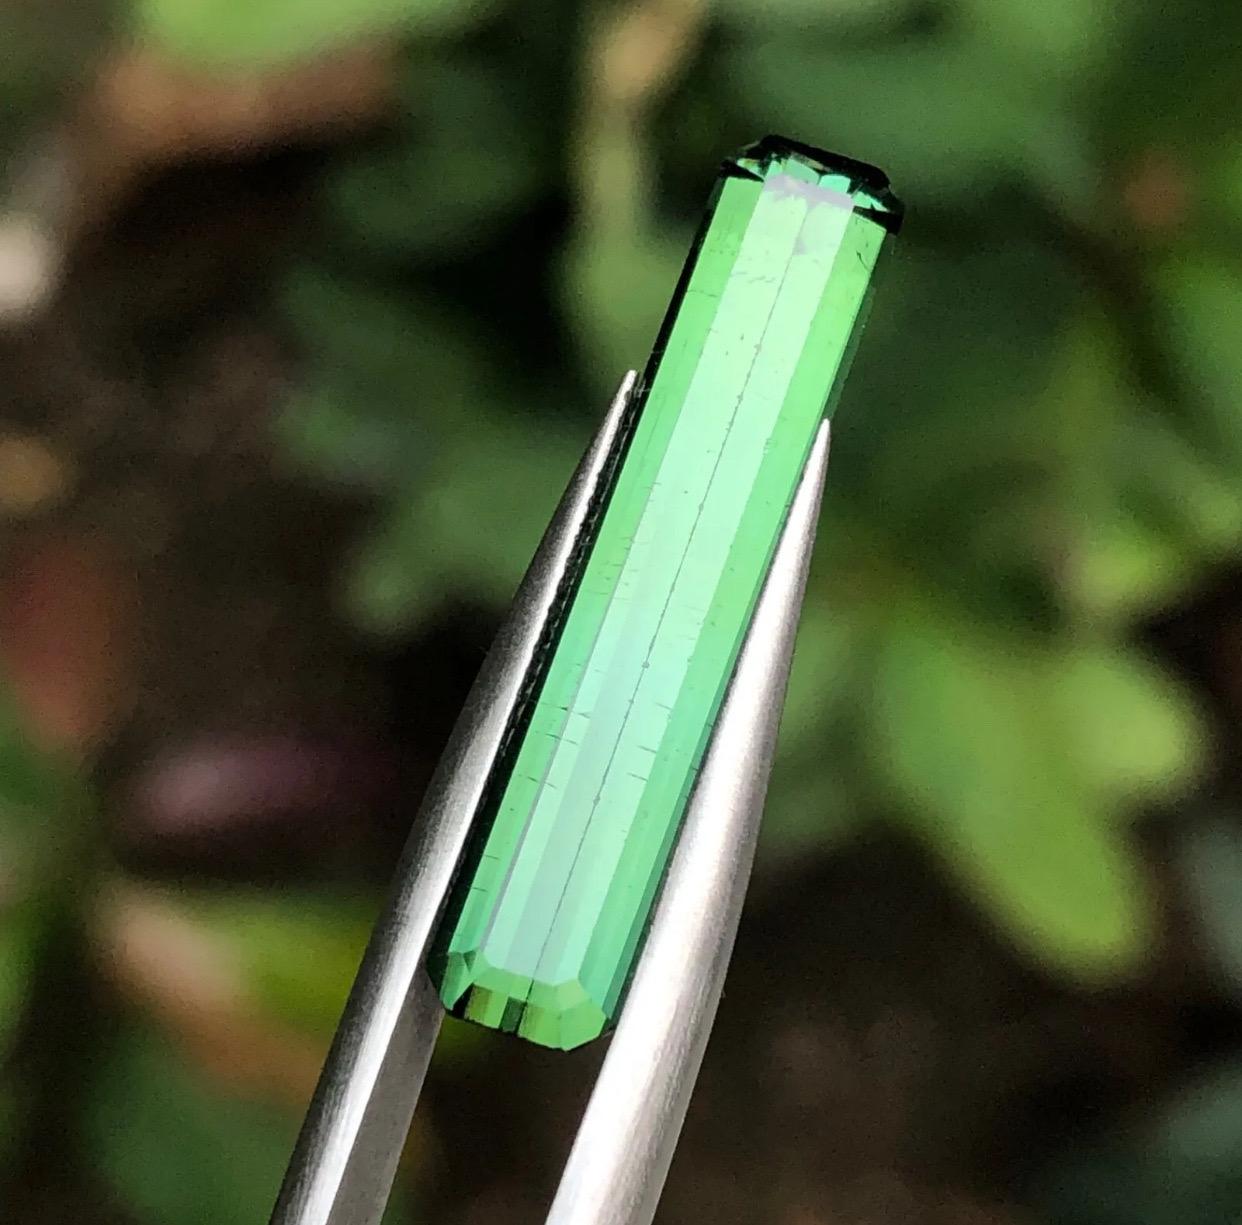 Gemstone Type: Tourmaline
Weight: 5.15 Carats
Dimensions: 25.97 x 5.23 x 3.91
Color: Green
Clarity: Chip on Girdle Approx 95% Eye Clean
Treatment: Not Treated
Origin: Afghanistan
Certificate: On demand 

Discover the allure of our rare green